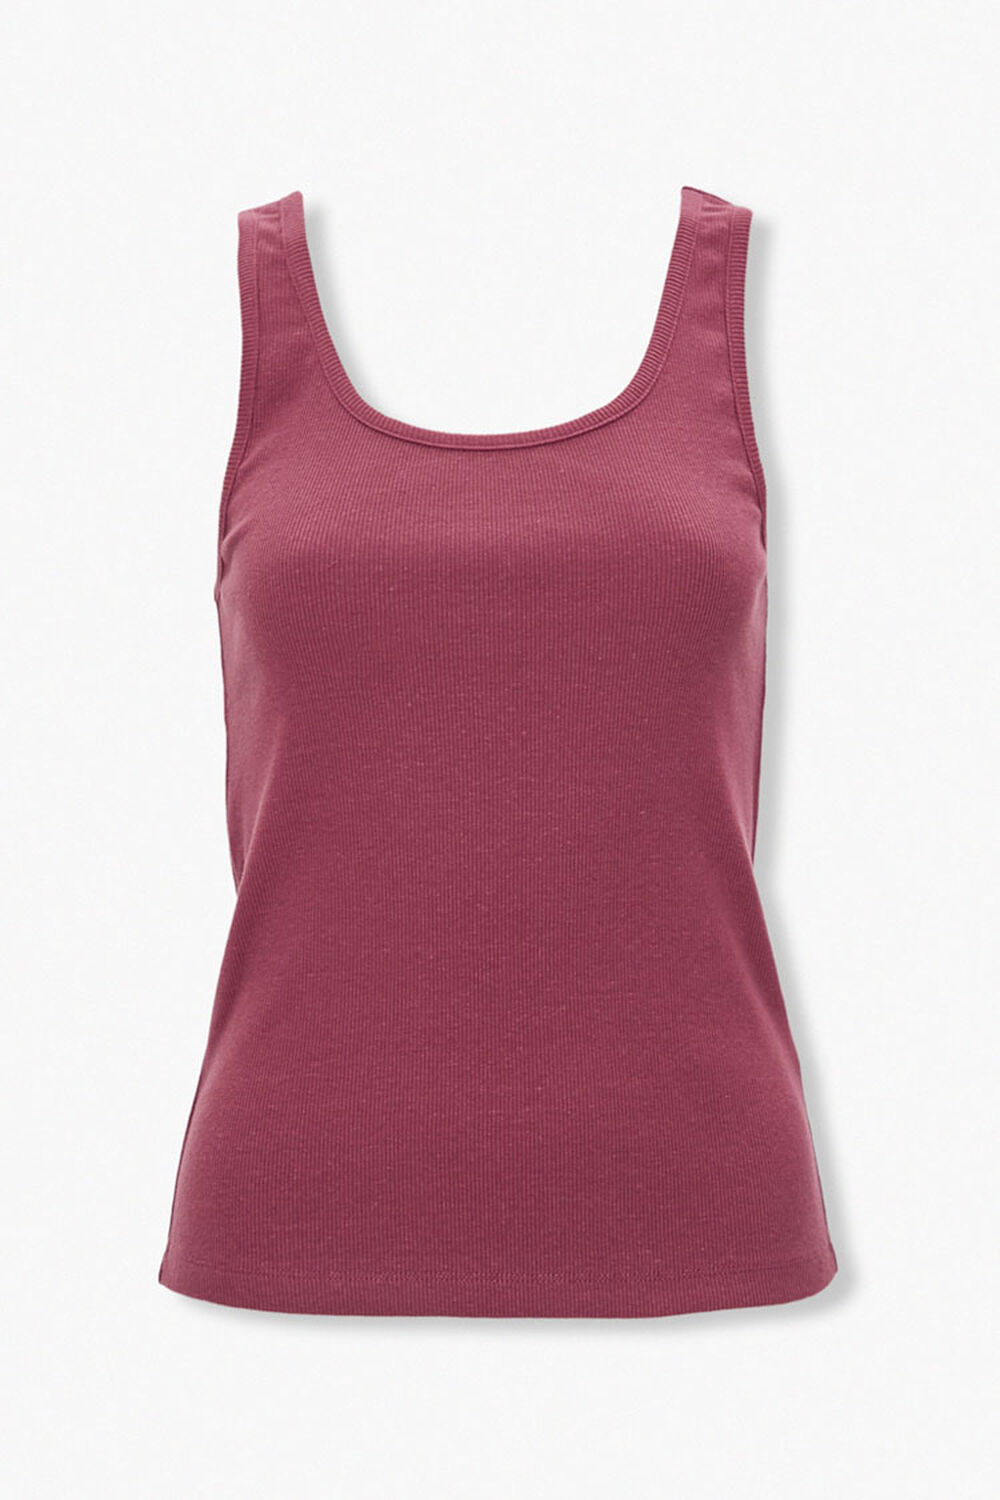 BERRY Ribbed Knit Tank Top, image 1